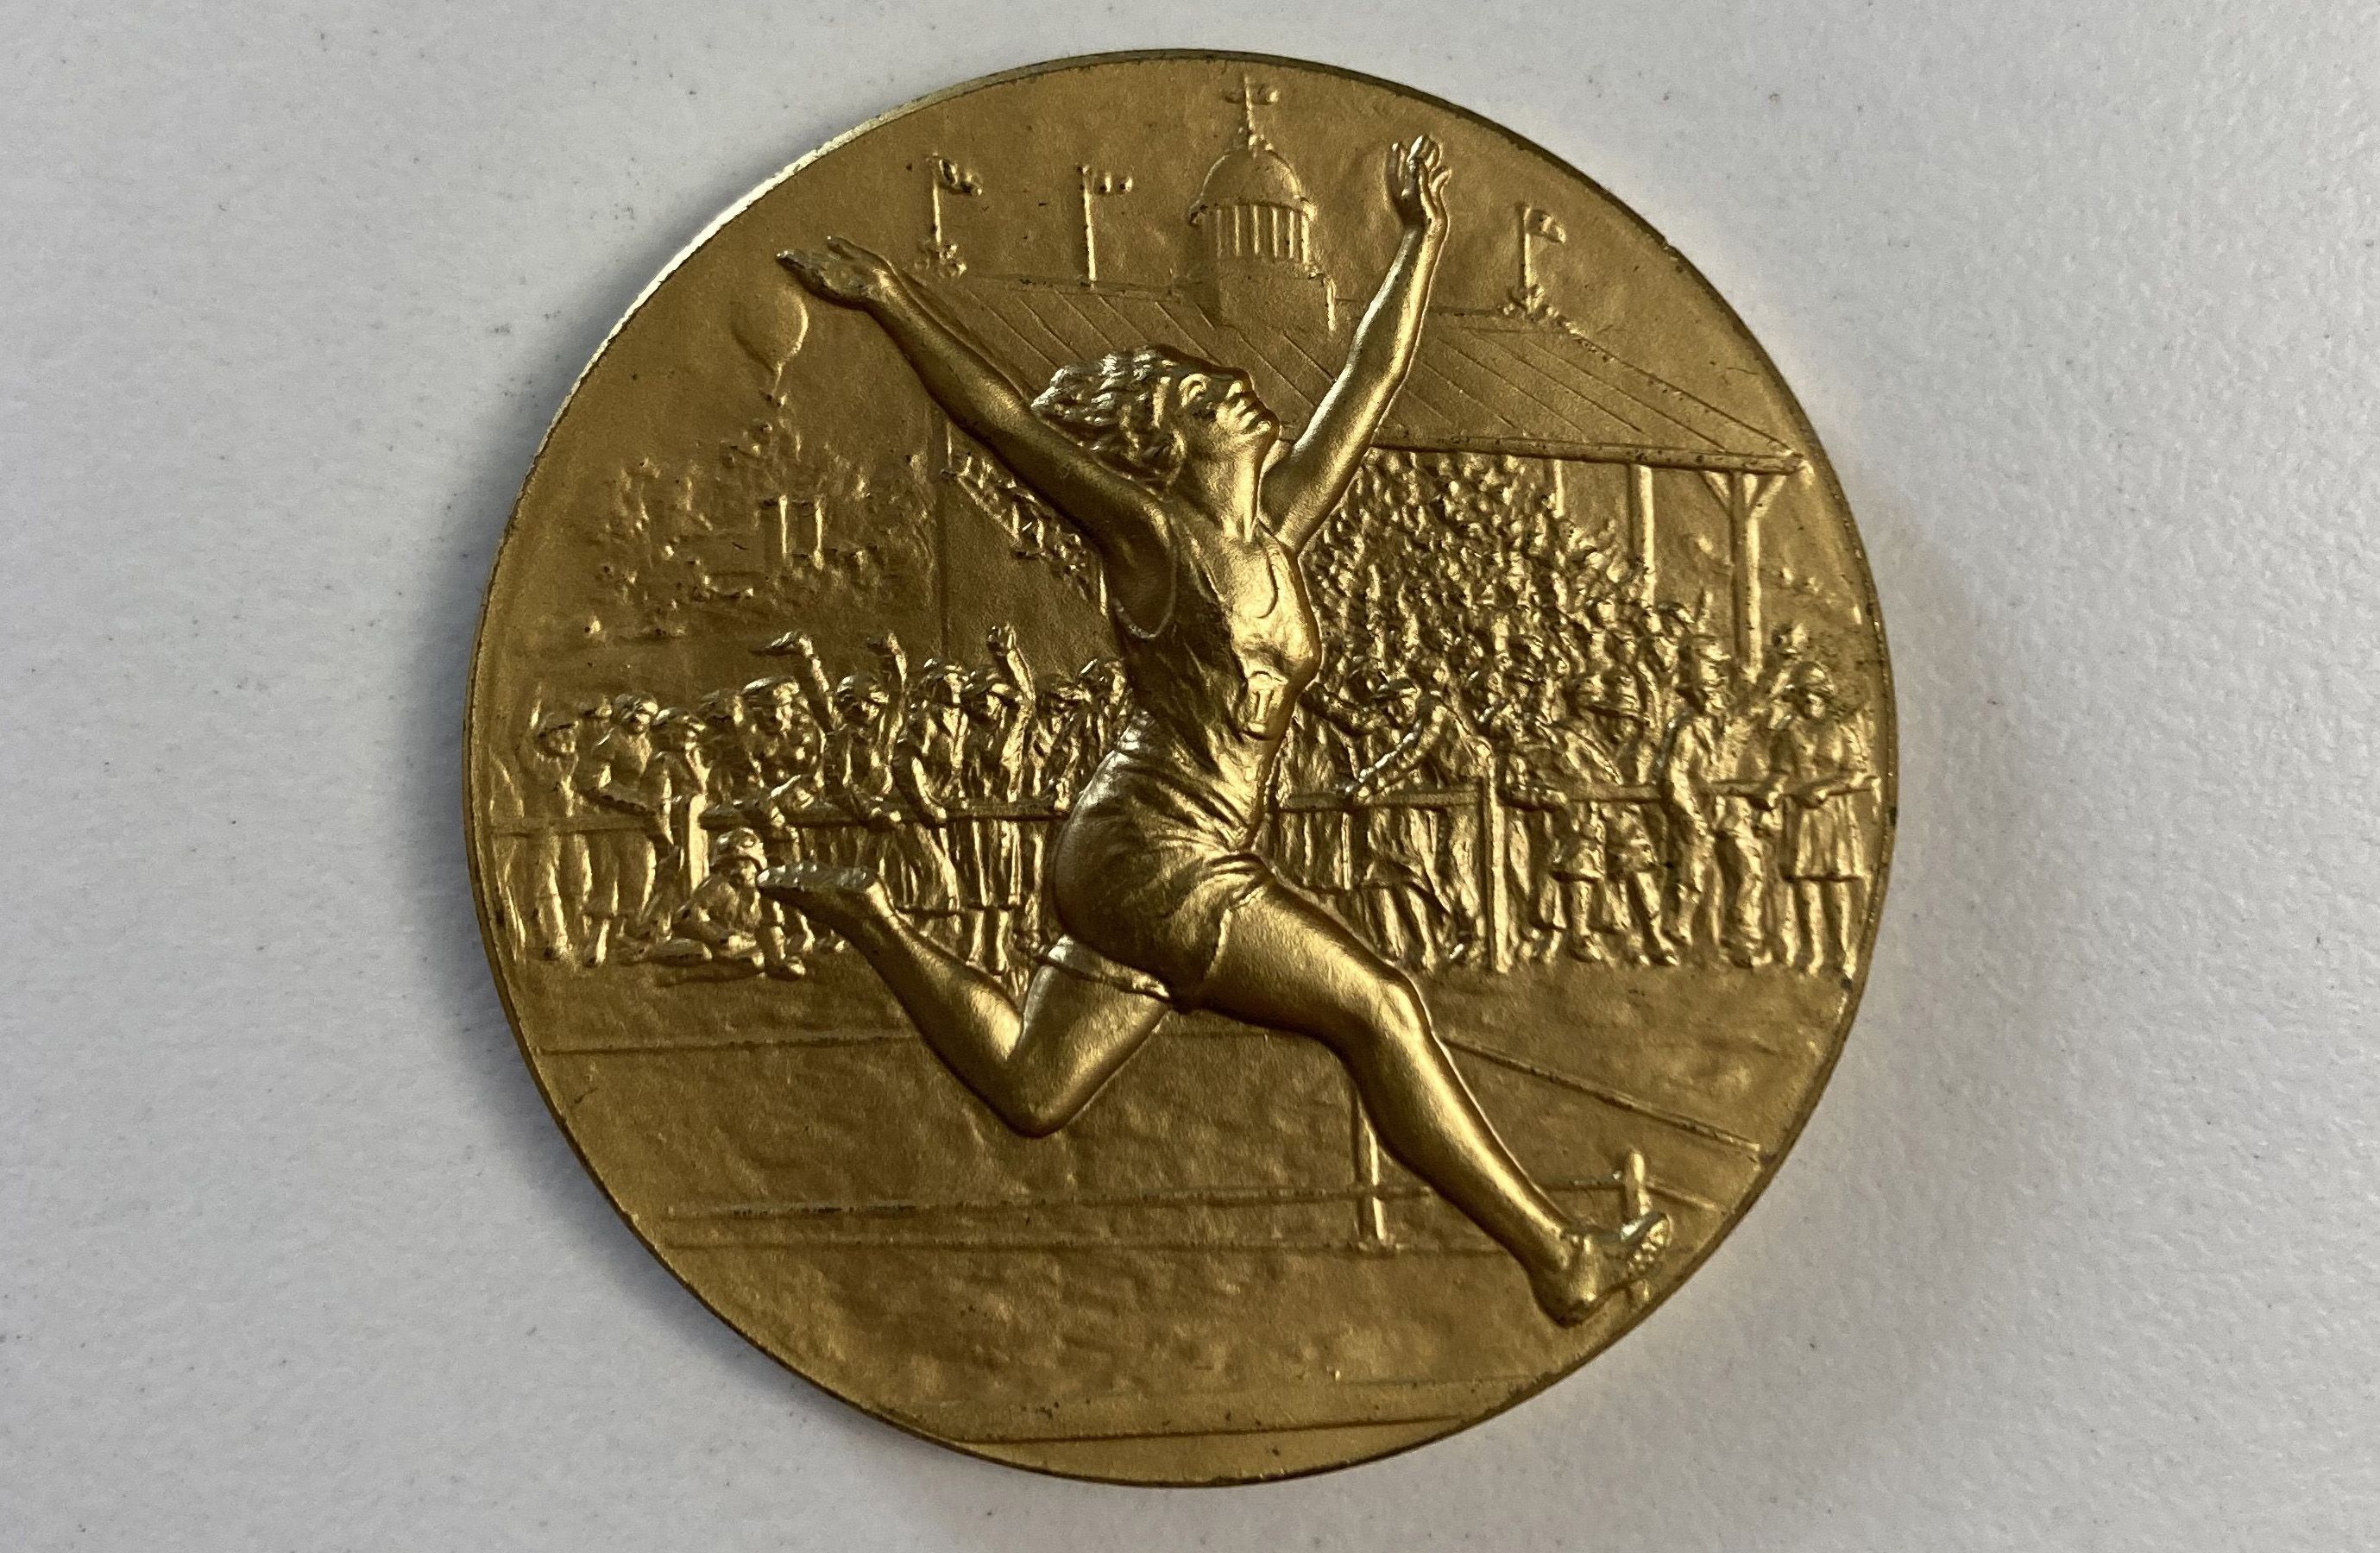 Doris Brown Heritage's historic cross country gold medal